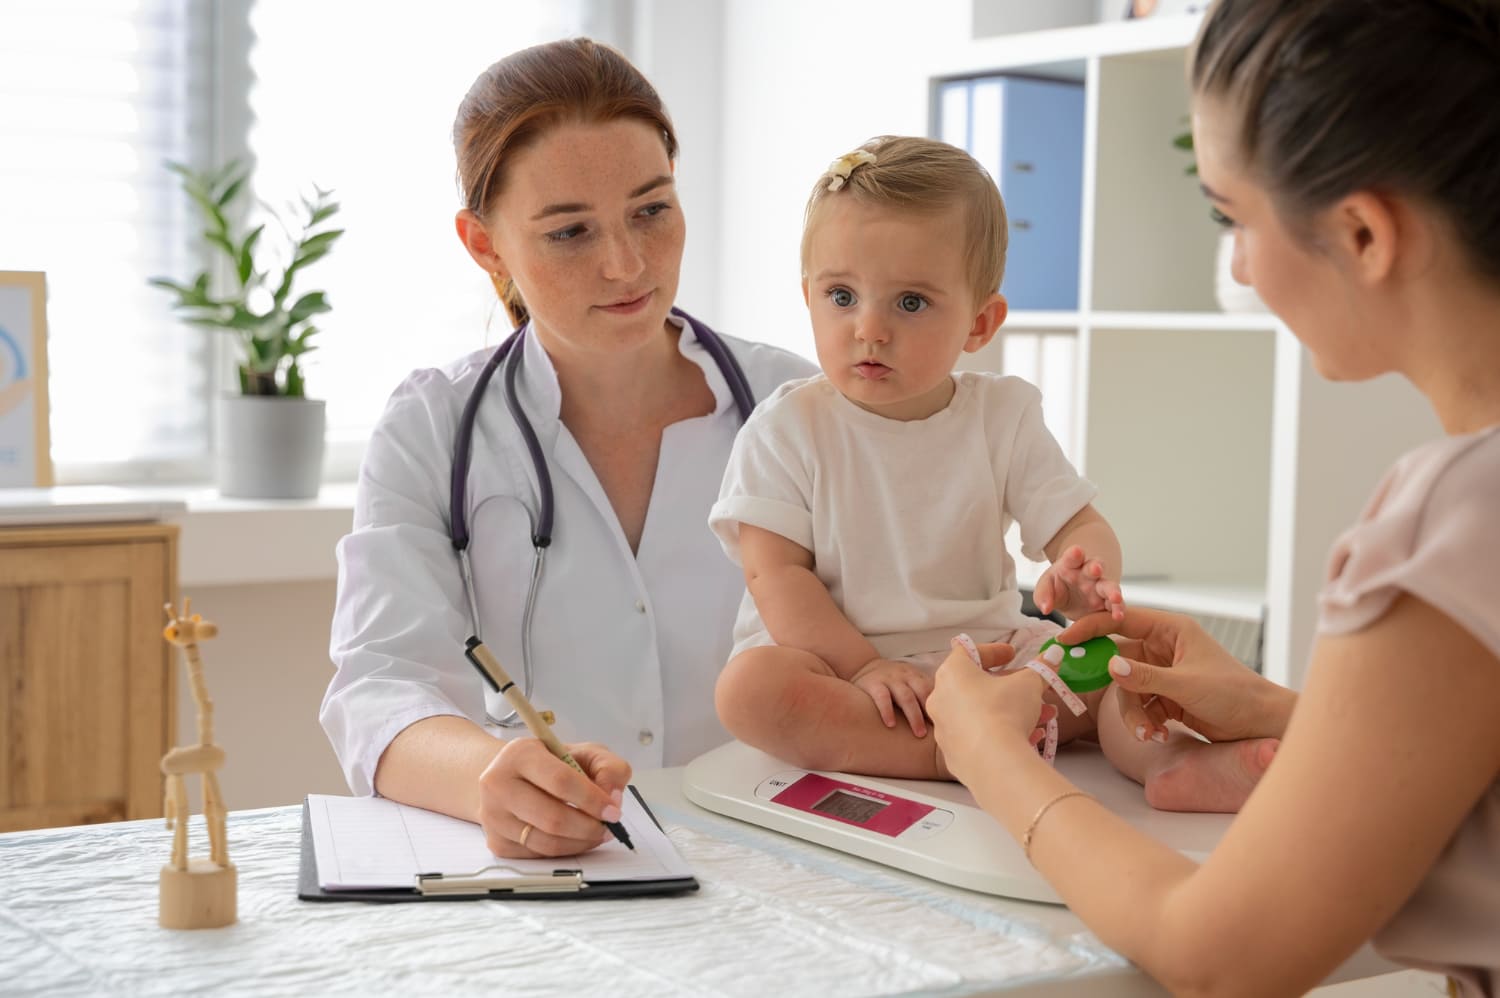 Pediatric Counselor-checking baby